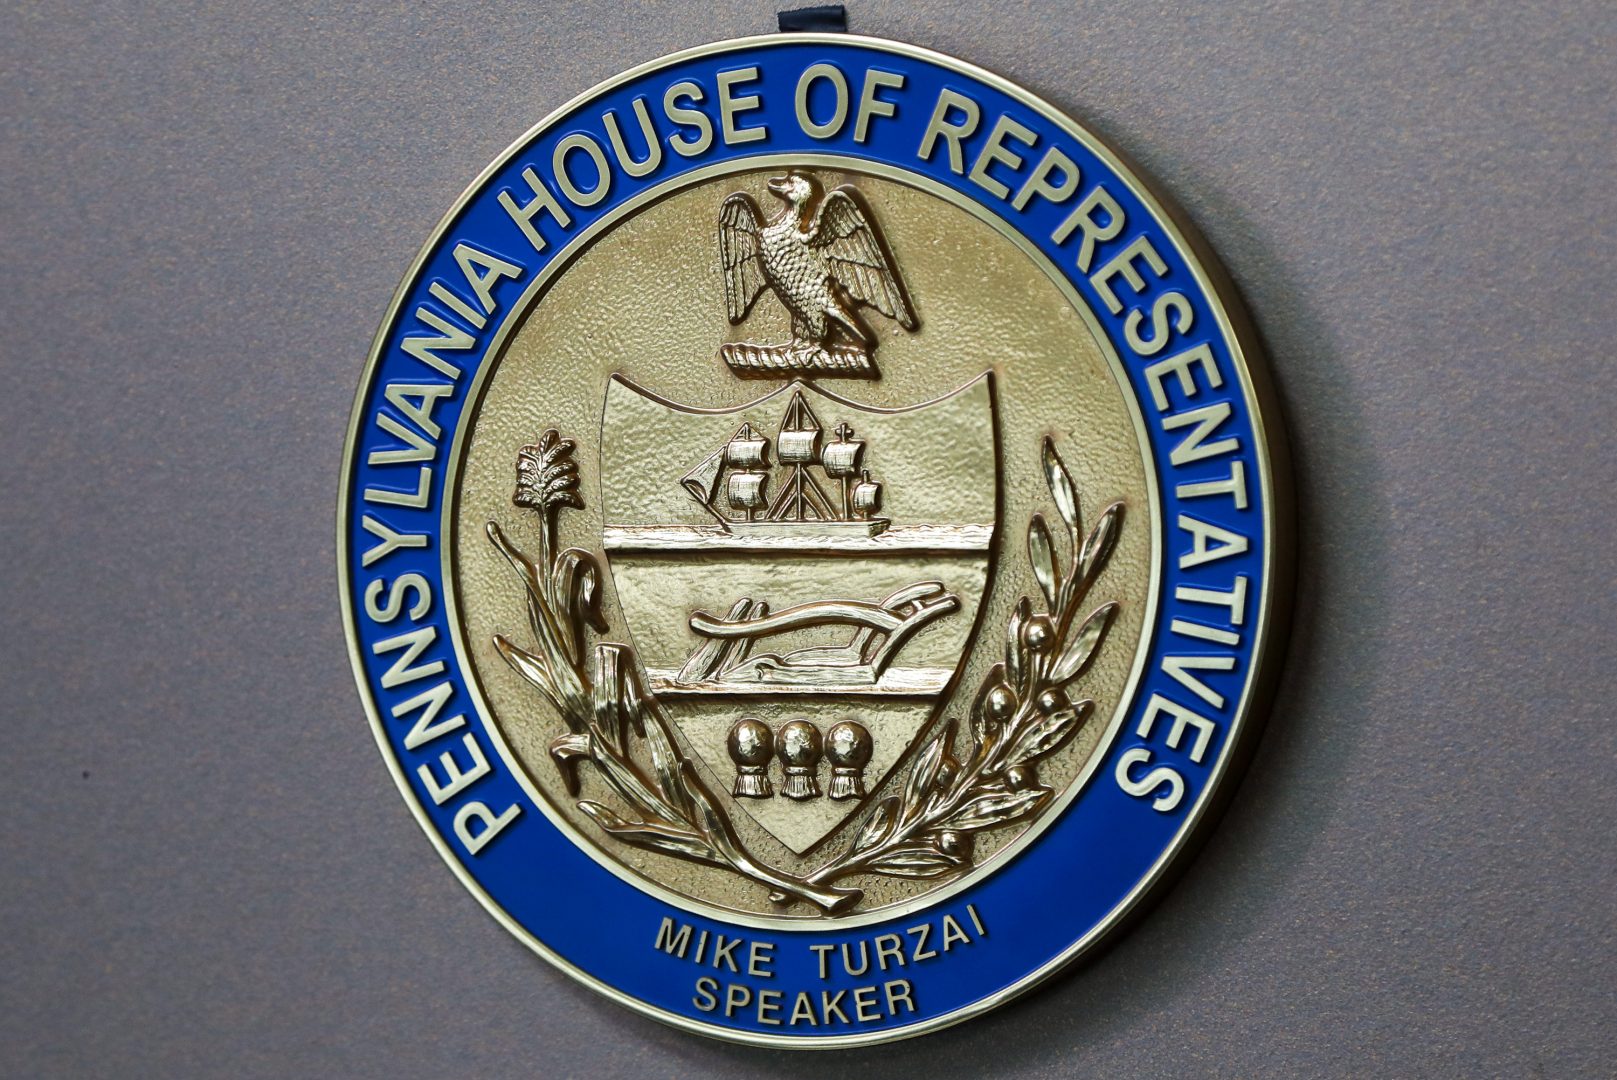 The emblem for Pennsylvania Speaker of the House, Mike Turzai, is on the wall at his offices as he announces at a news conference he will not run for another term as a Pennsylvania Representative, Thursday, Jan. 23, 2020, in McCandless, Pa. (AP Photo/Keith Srakocic)